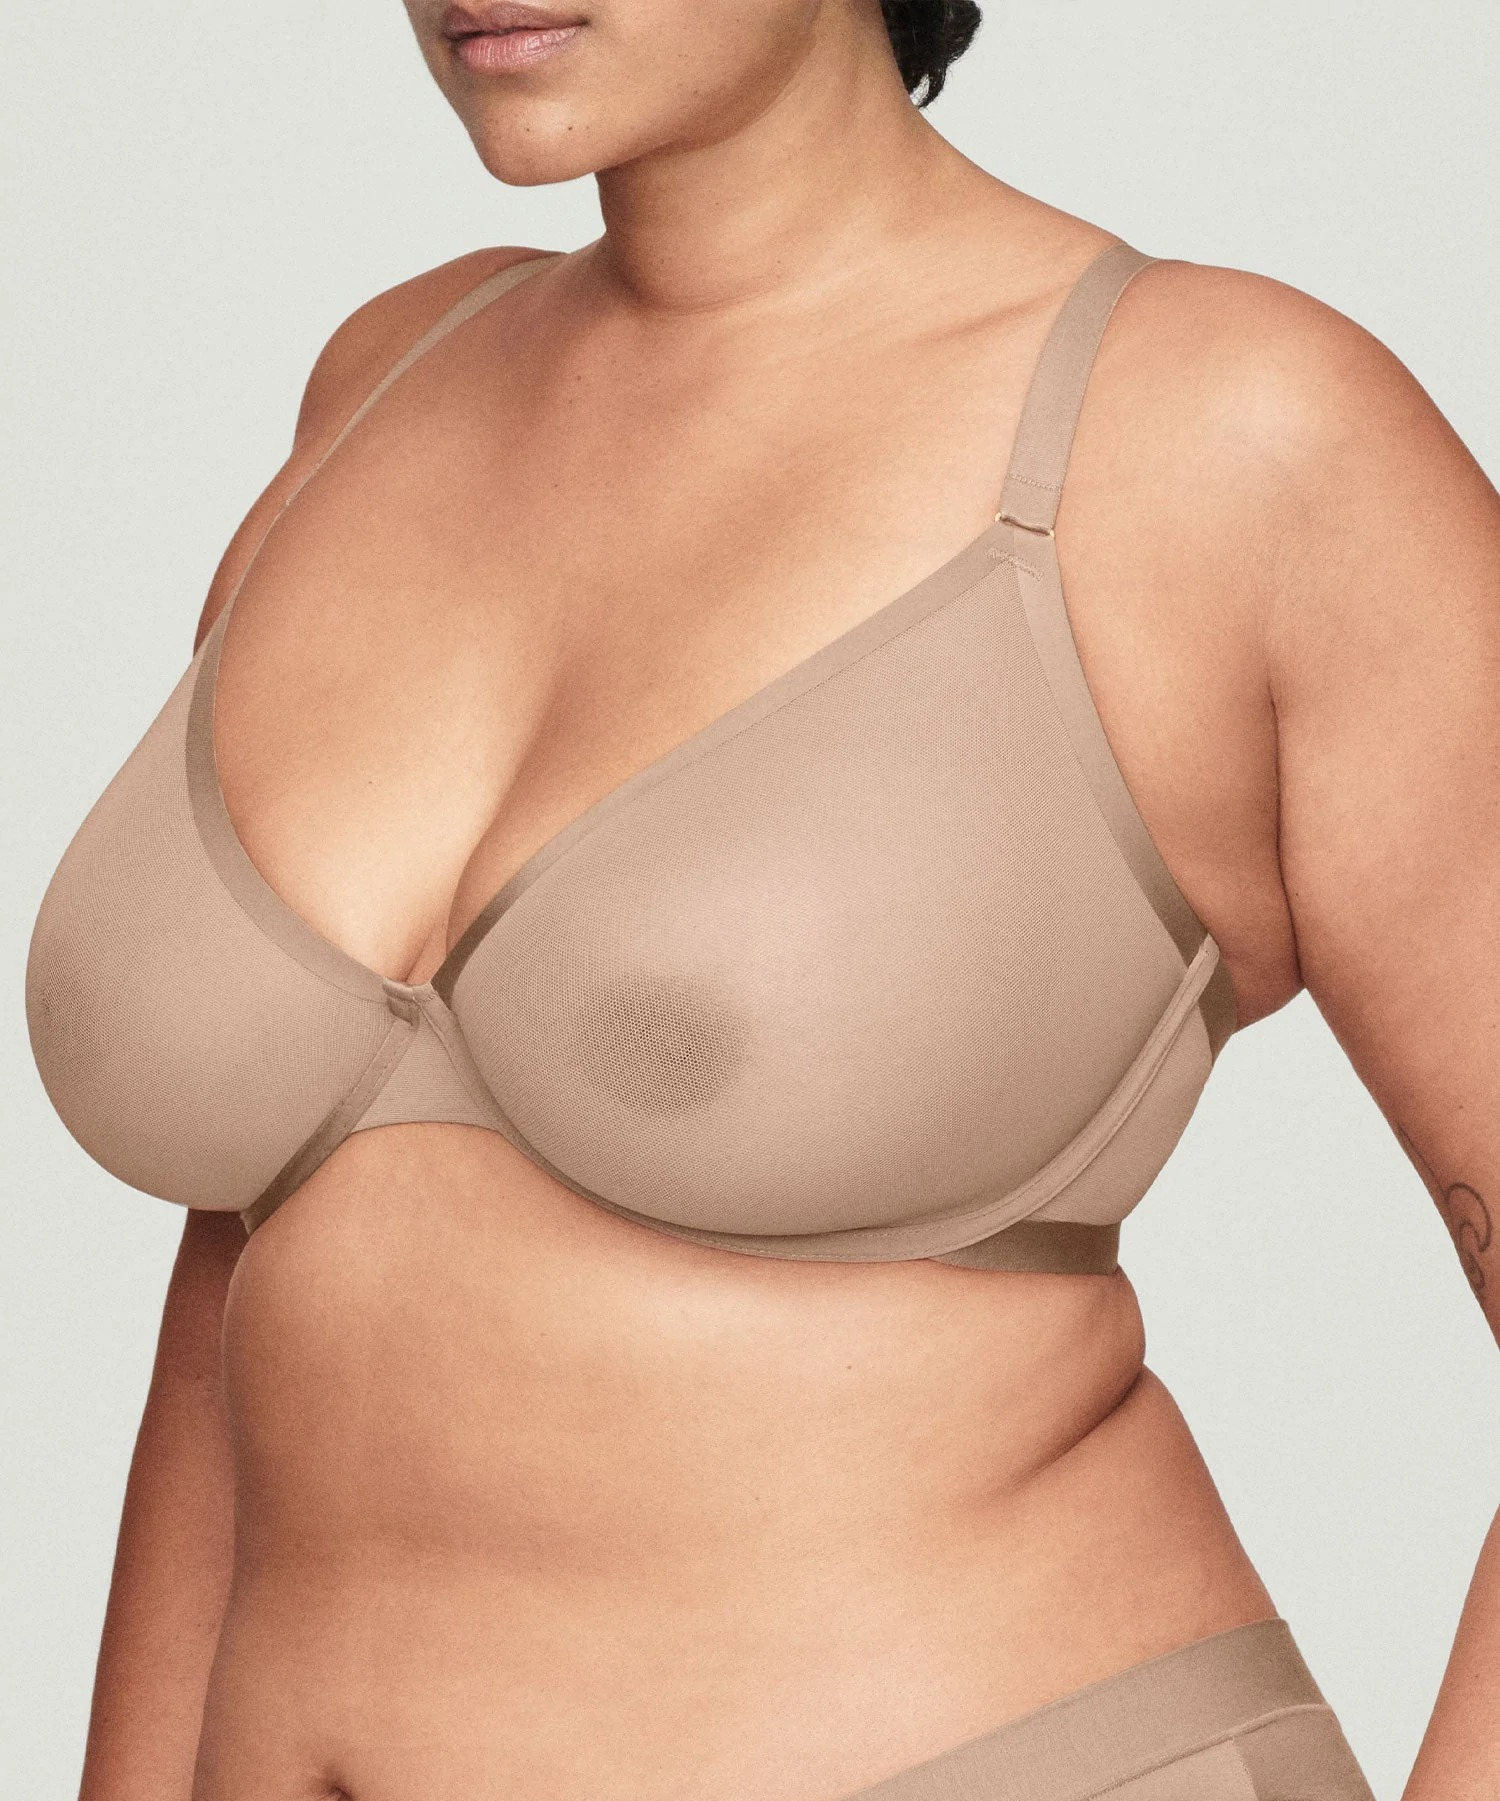 alexis auger recommends see thru bras pic